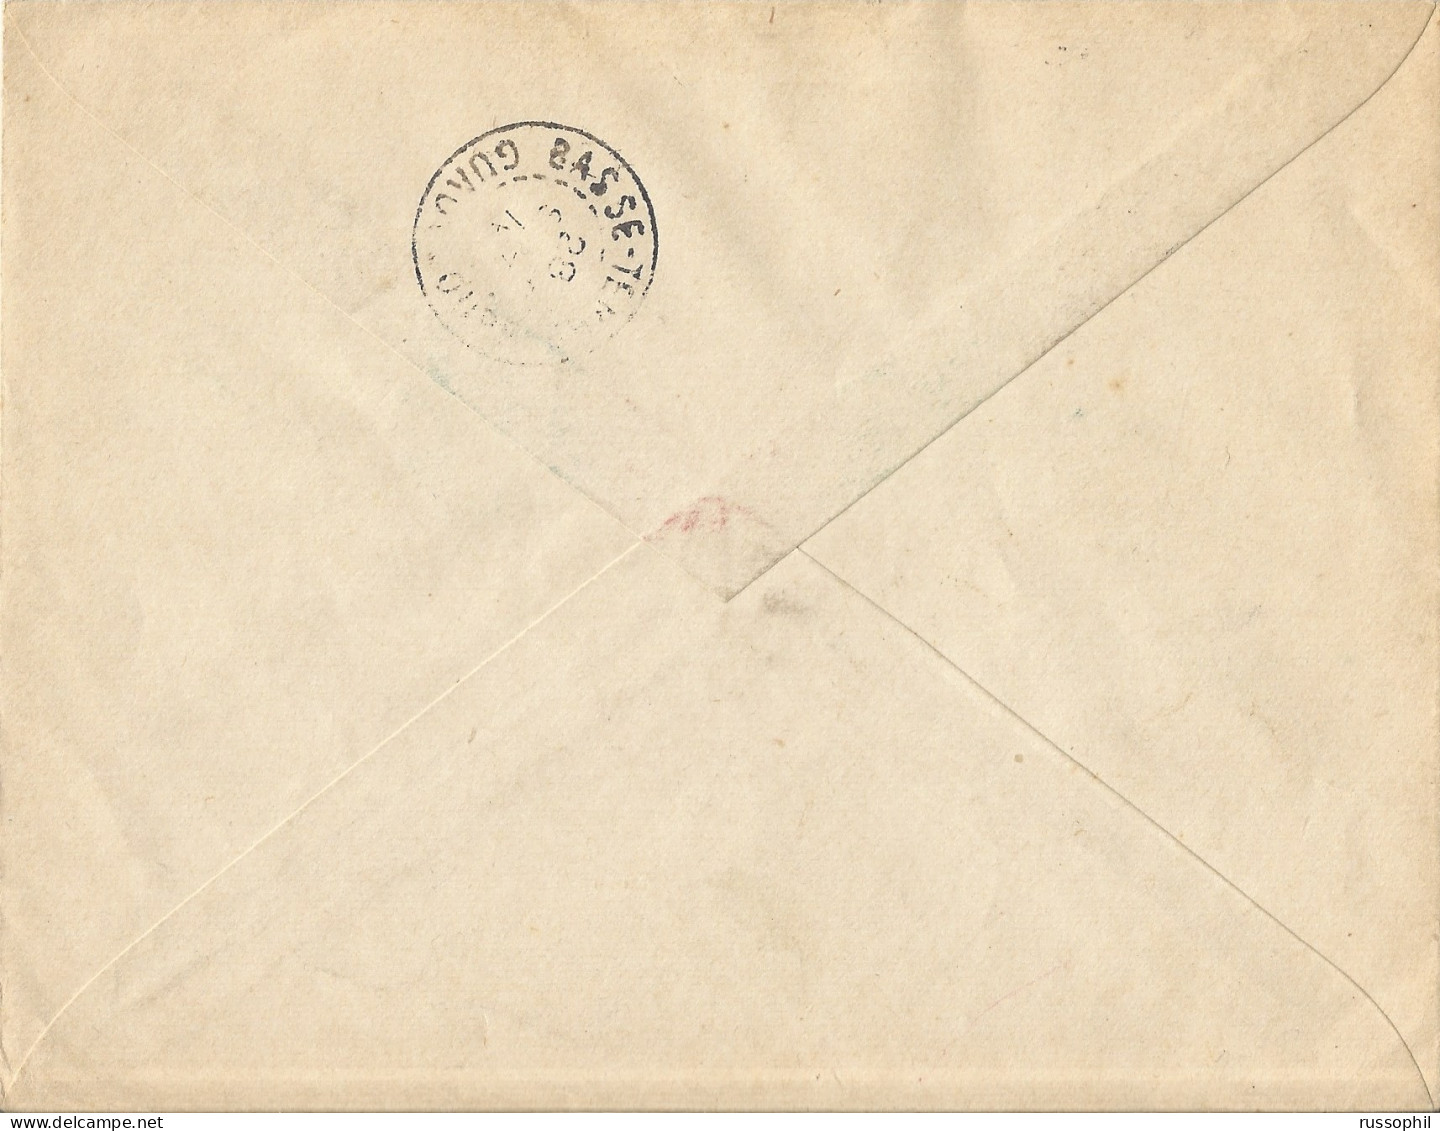 GUADELOUPE - FDC - 3 FR. 30 CENT. 5 STAMP FRANKING ON COVER FROM POINTE A PITRE TO BASSE TERRE - 27 SEPT 1943 - Covers & Documents